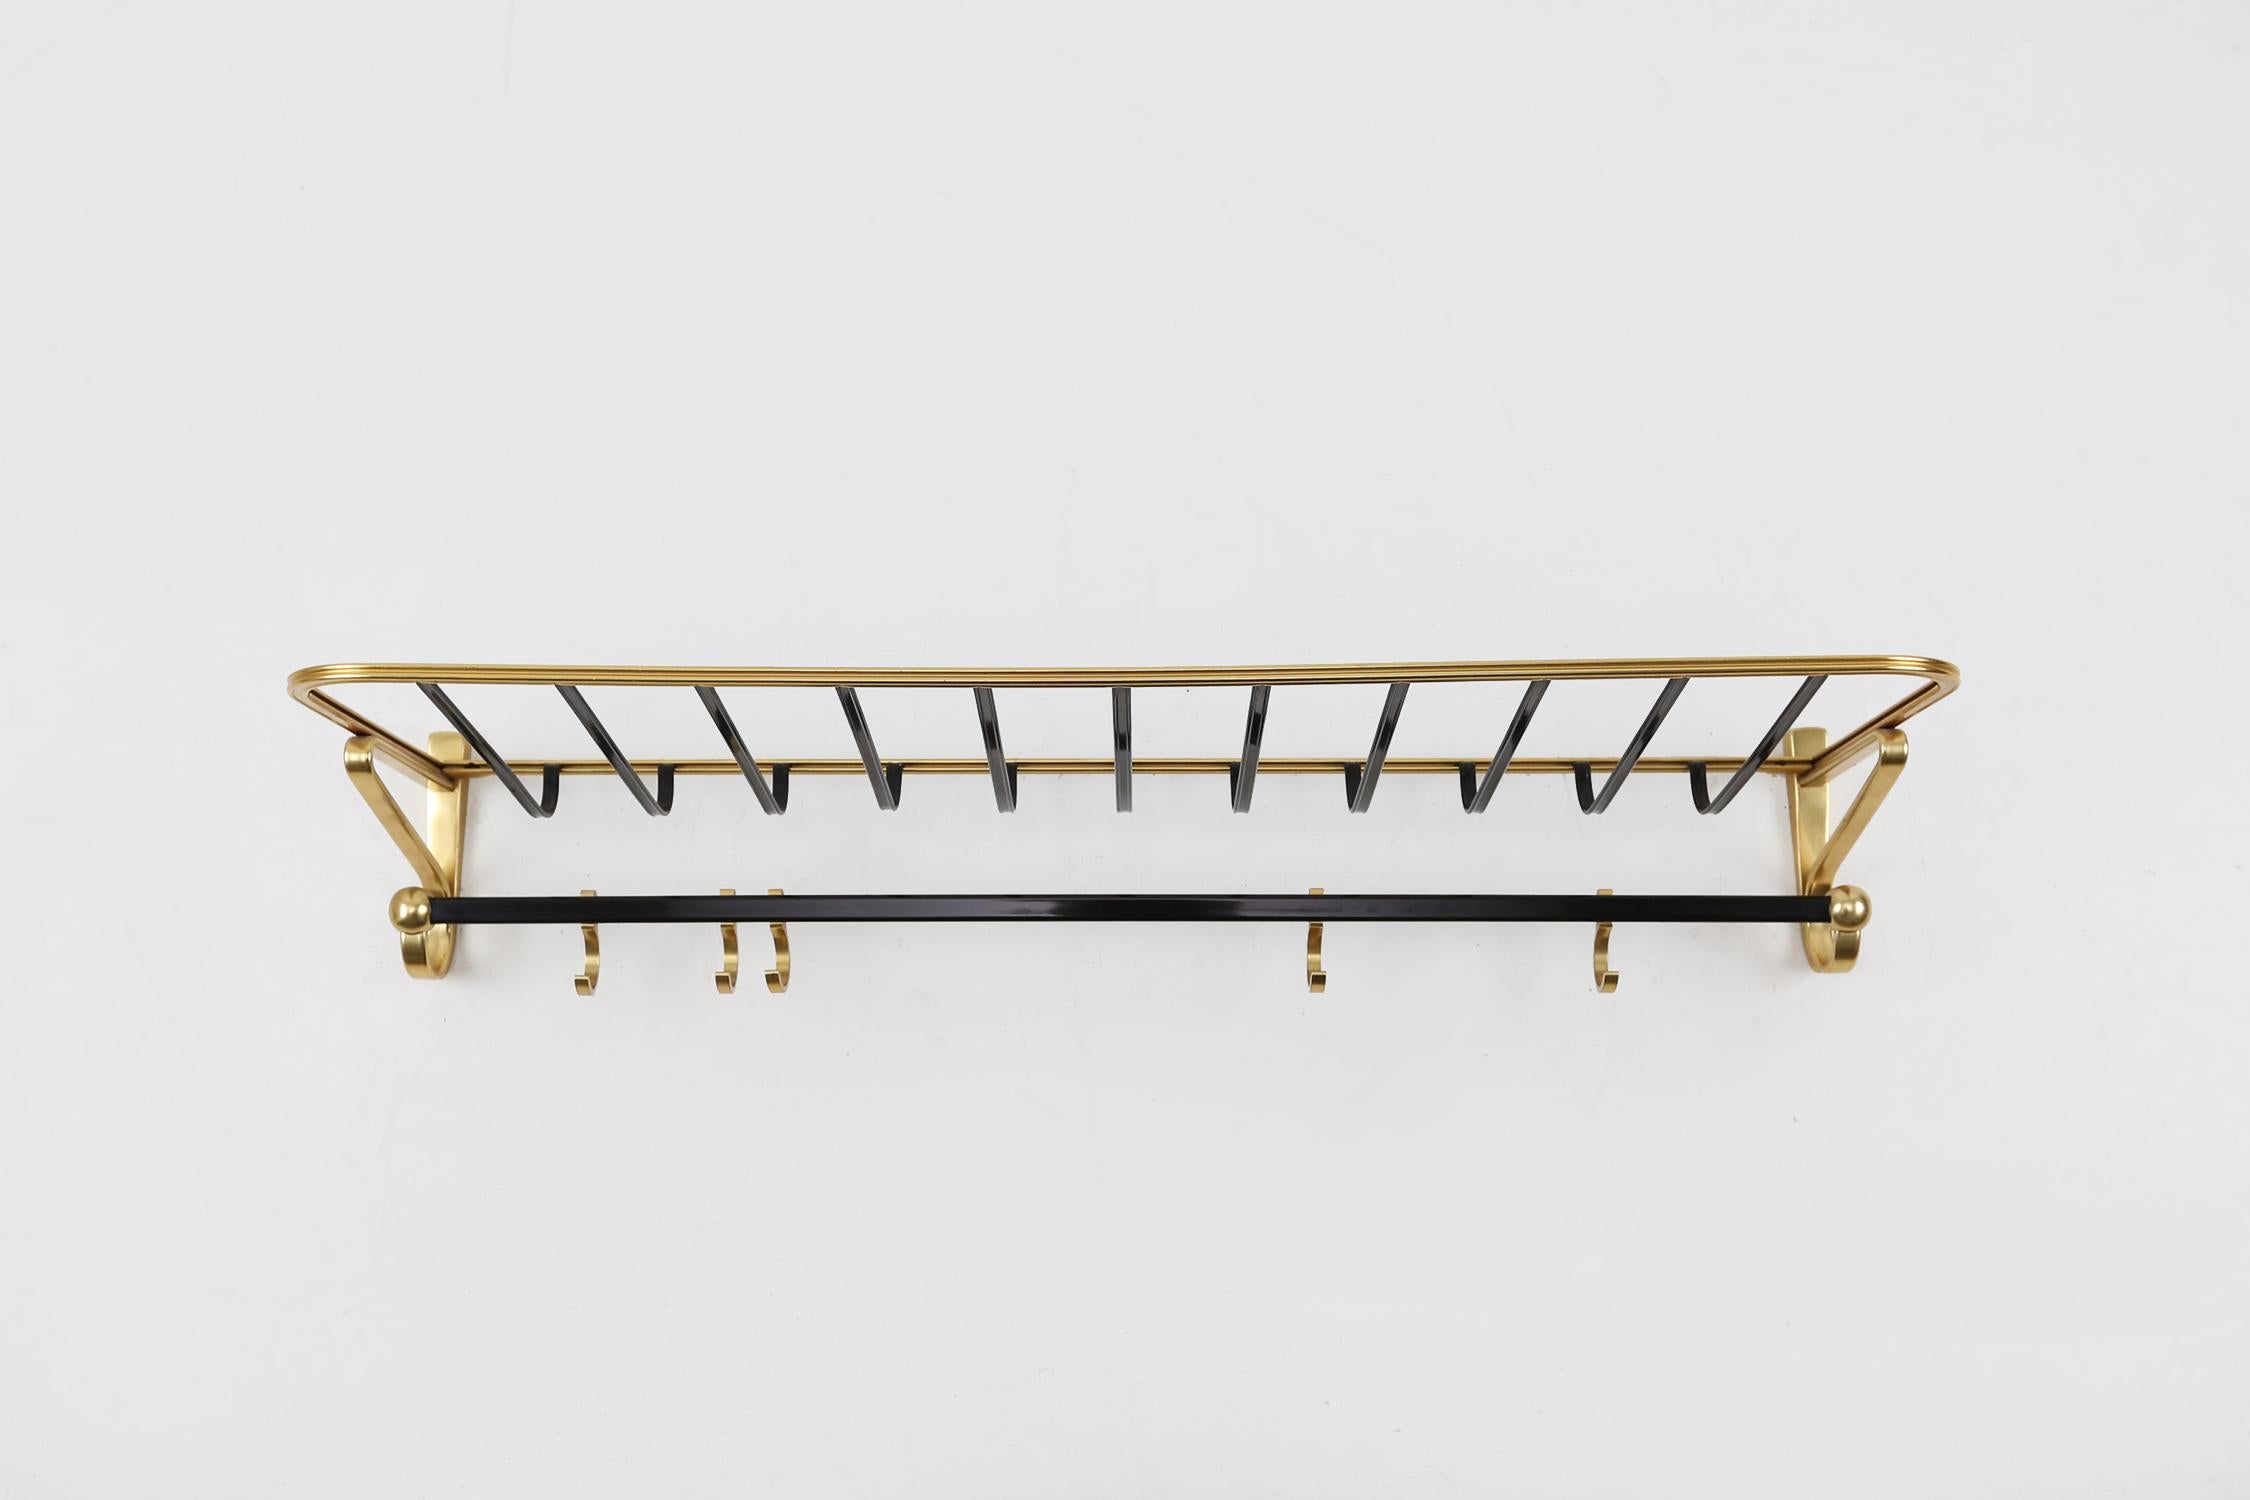 Mid-century coat rack made of aluminium in gold and black color.
Racks are adjustable from left to right.